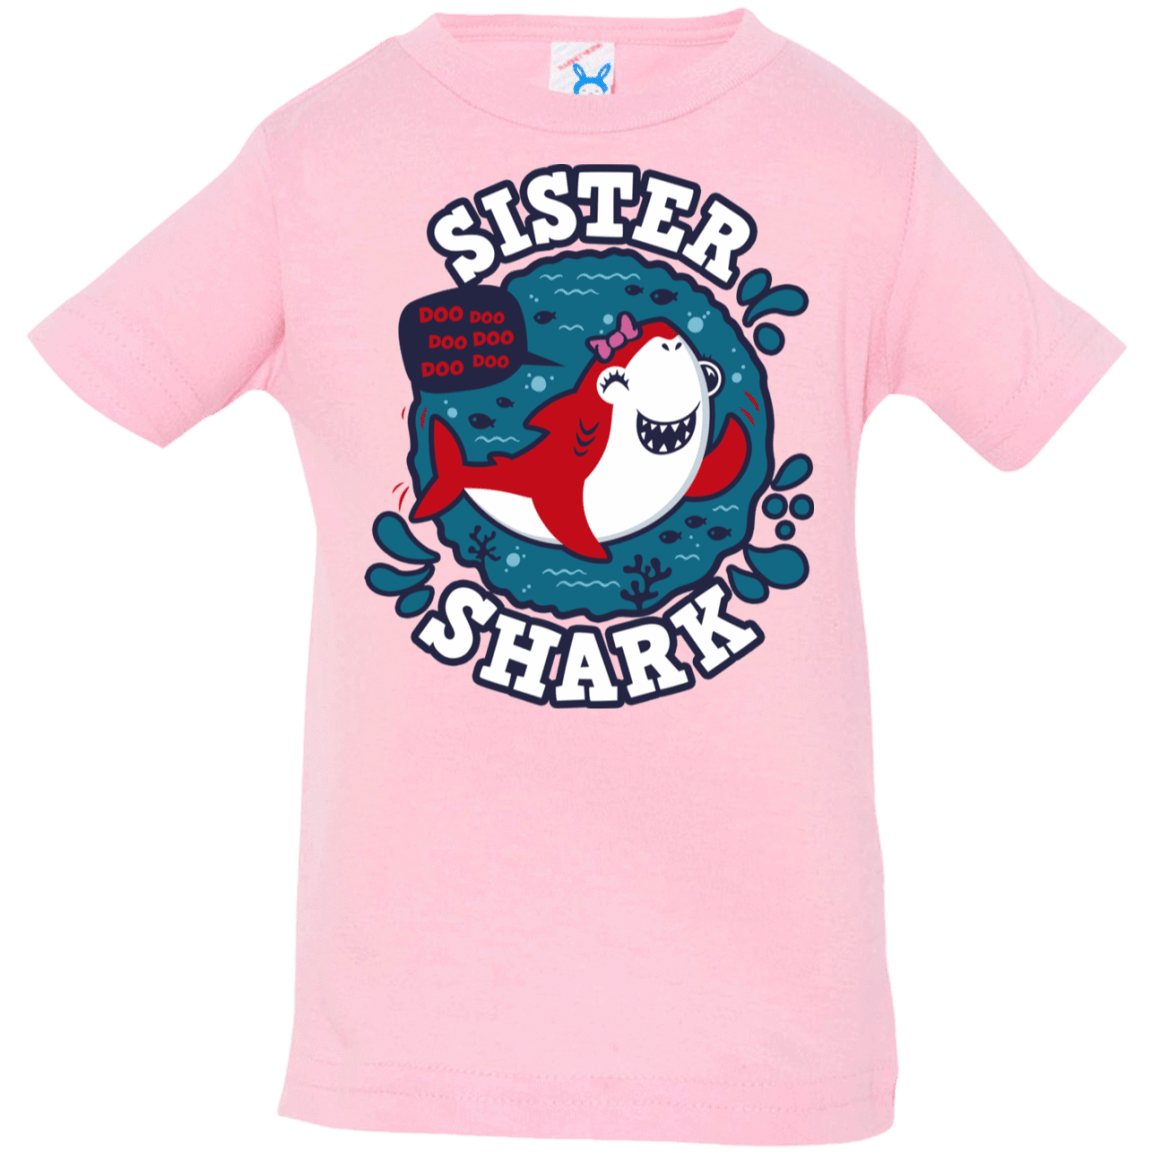 T-Shirts Pink / 6 Months Shark Family trazo - Sister Infant Premium T-Shirt